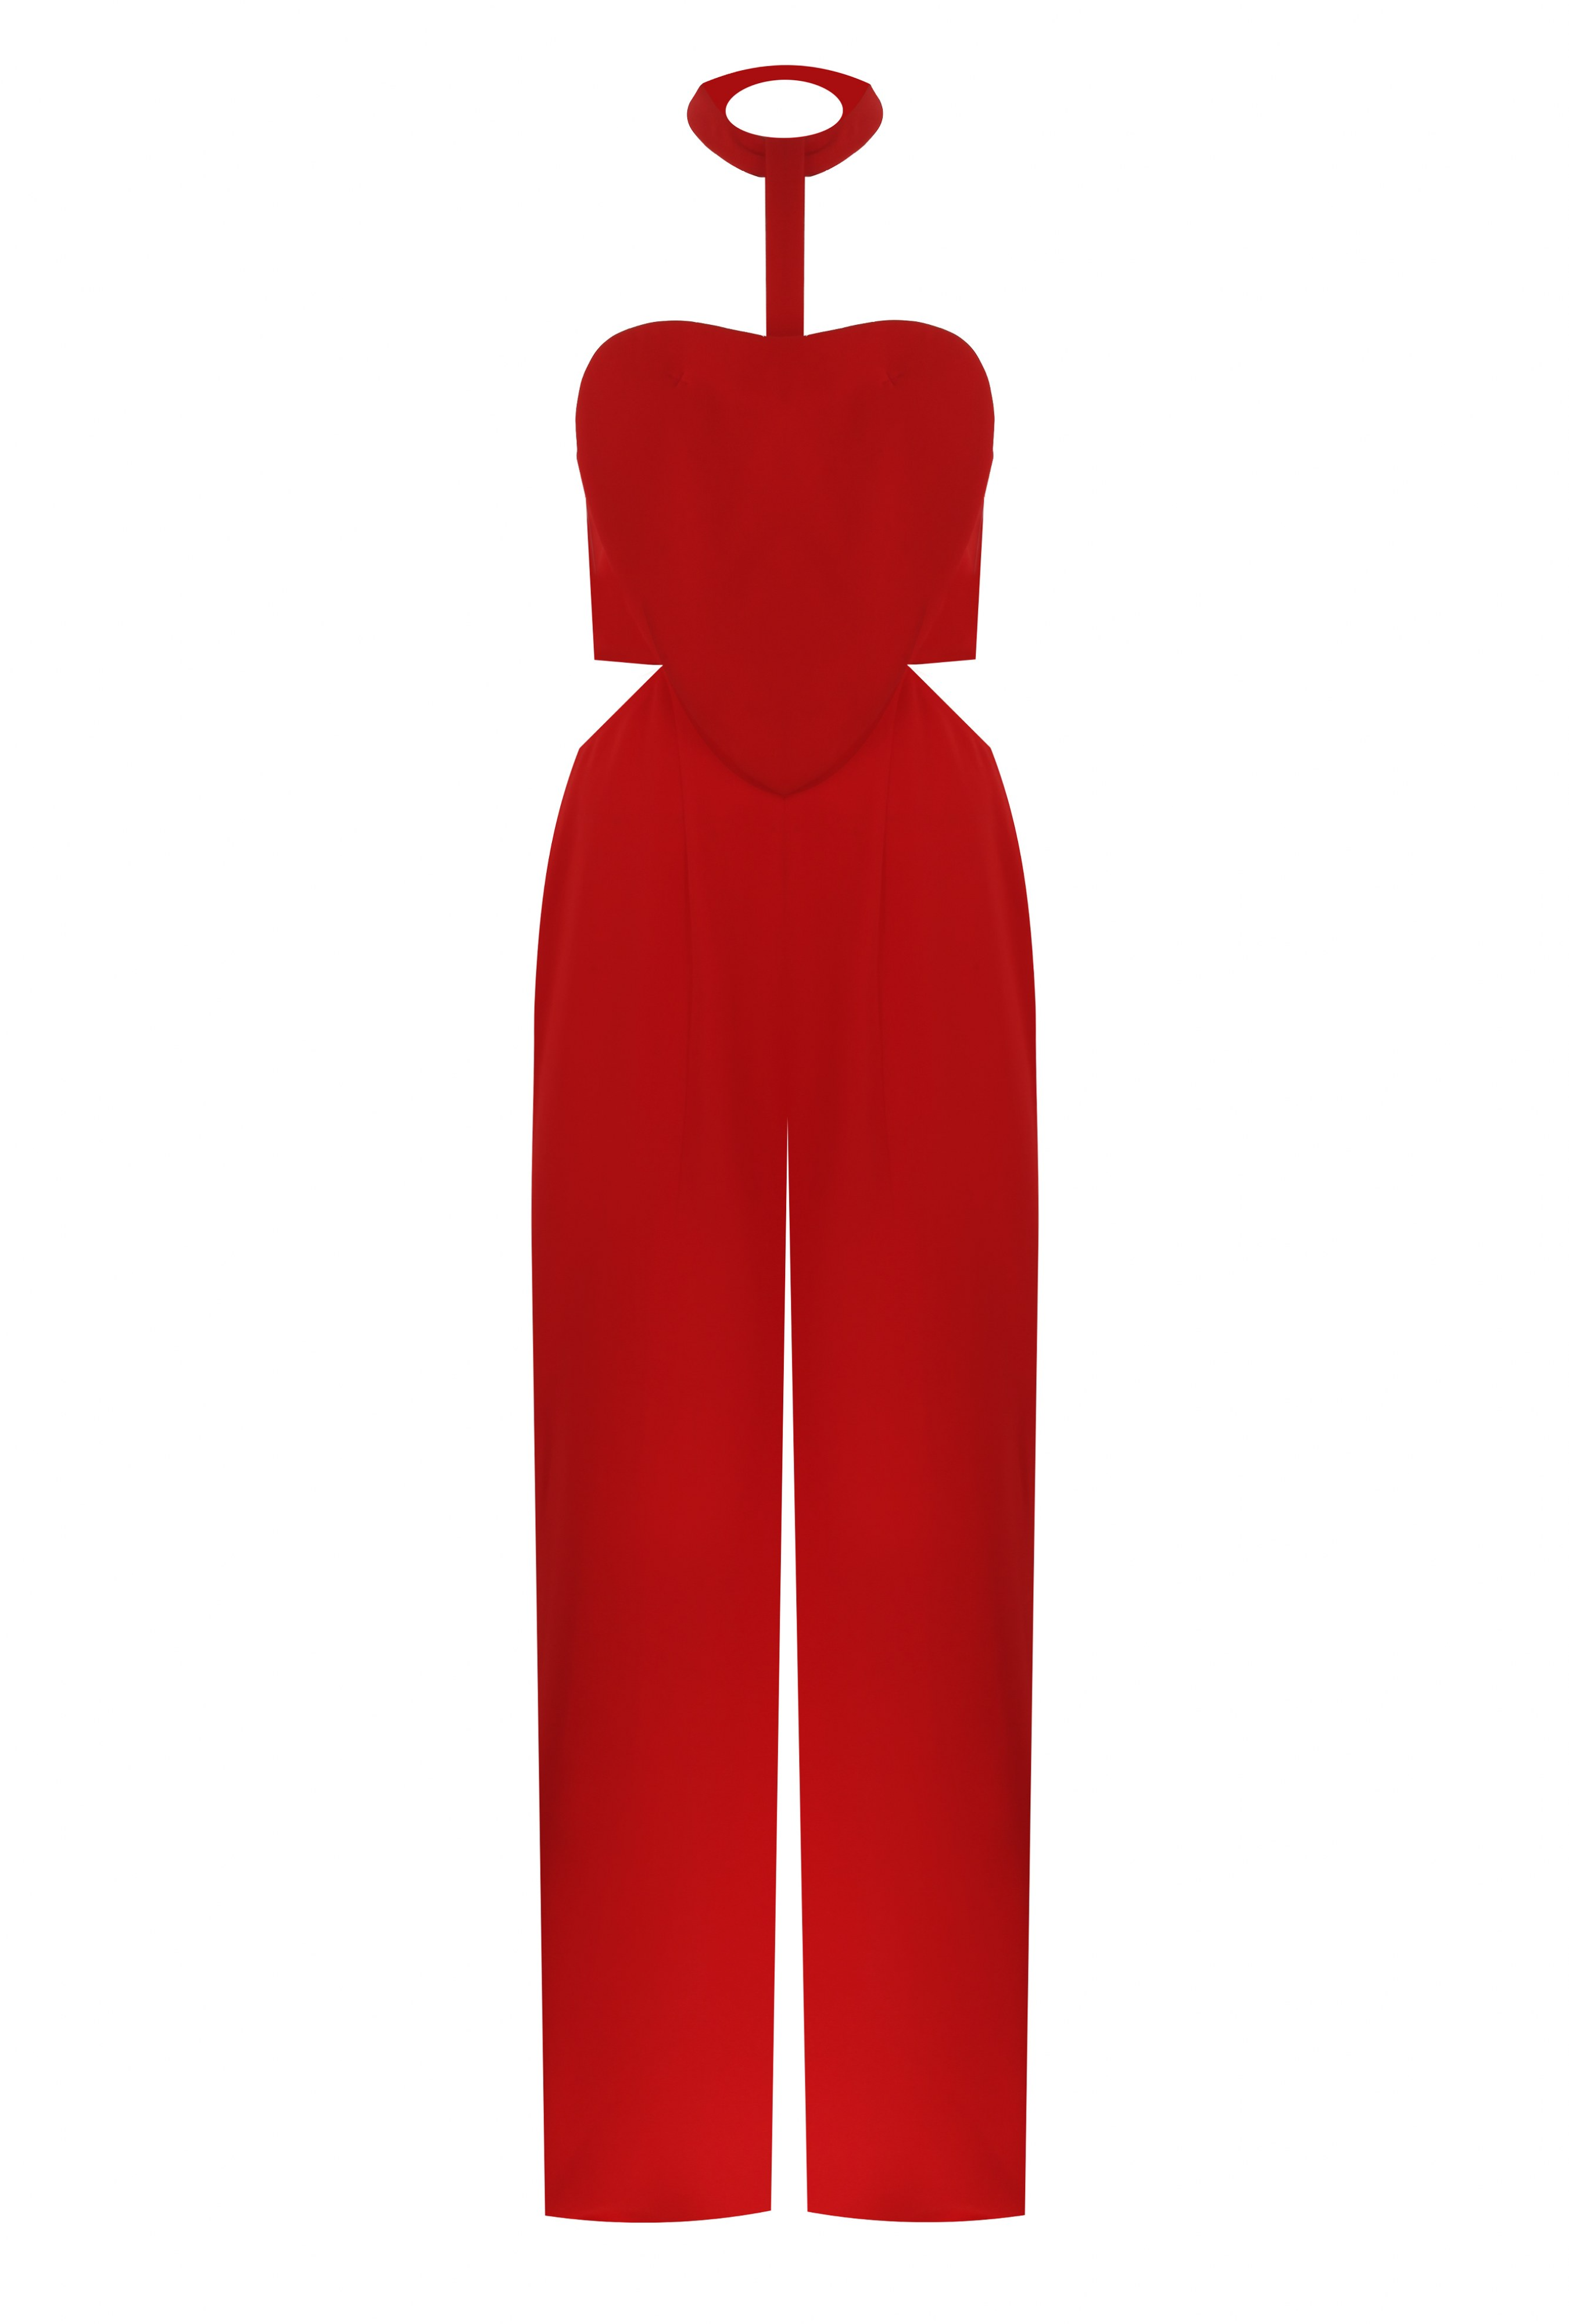 RED LOVE OVERALL DRESS